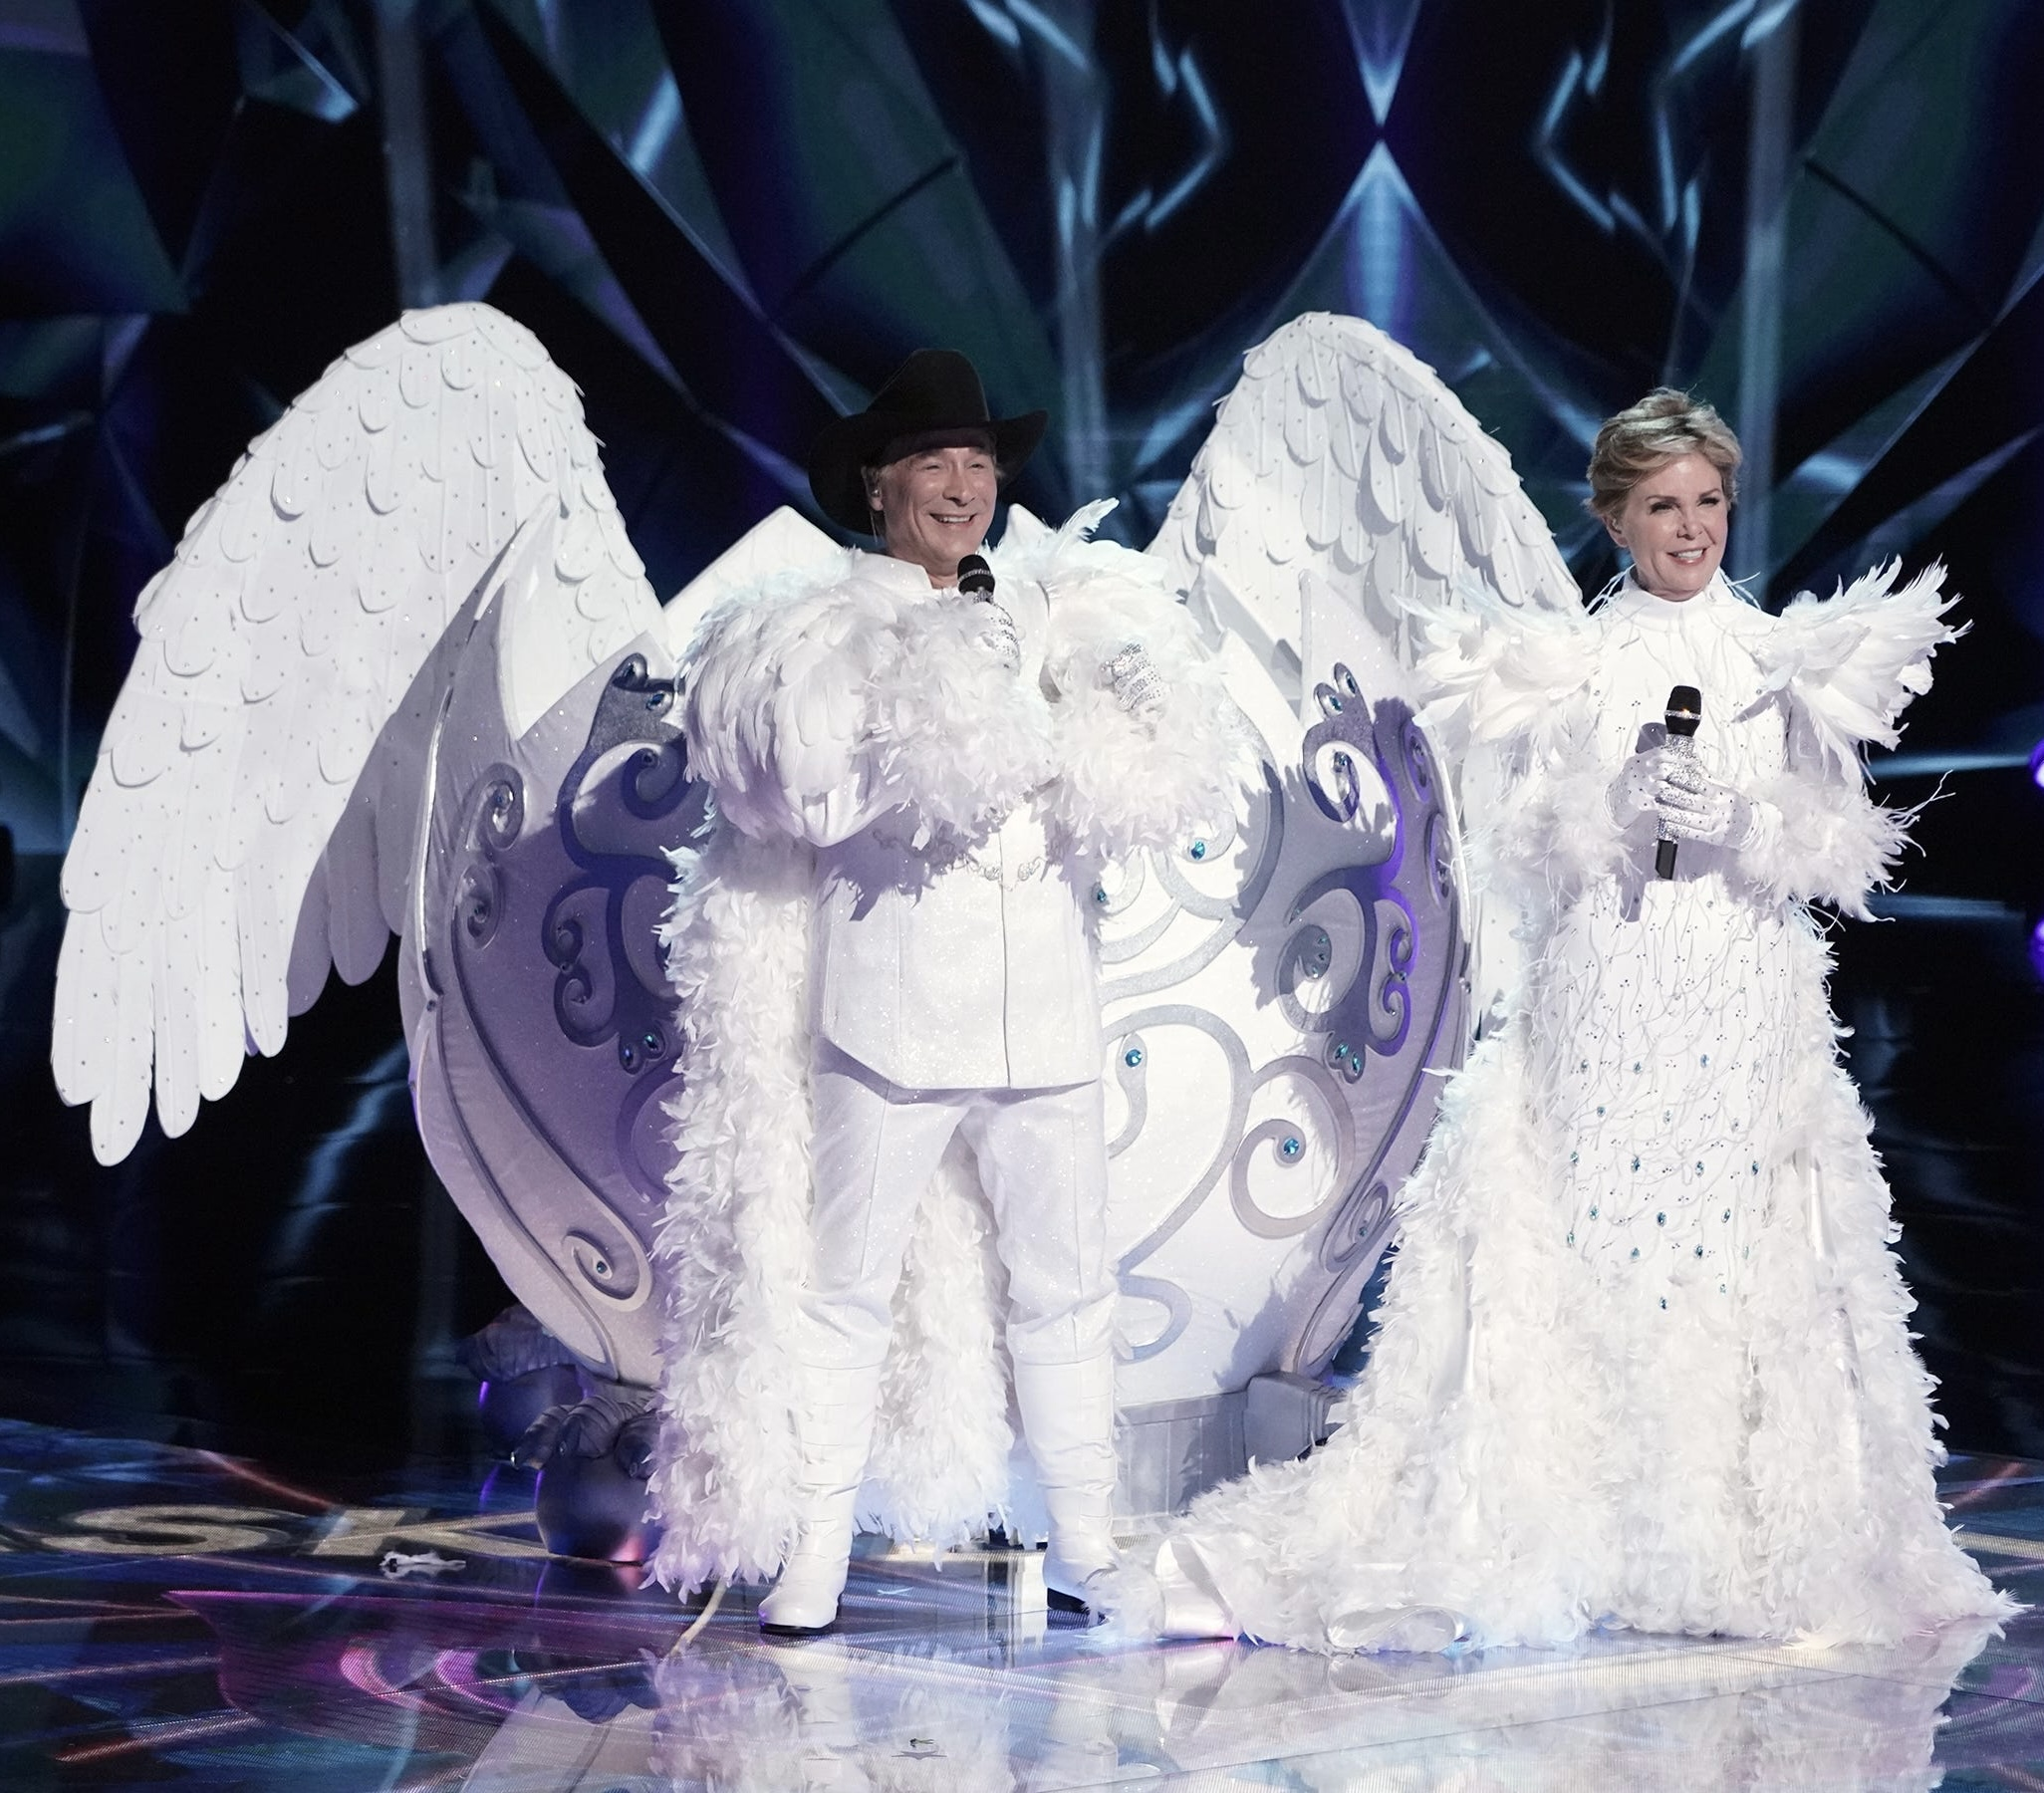 The Masked Singer' fans think Queen Bee is Meghan